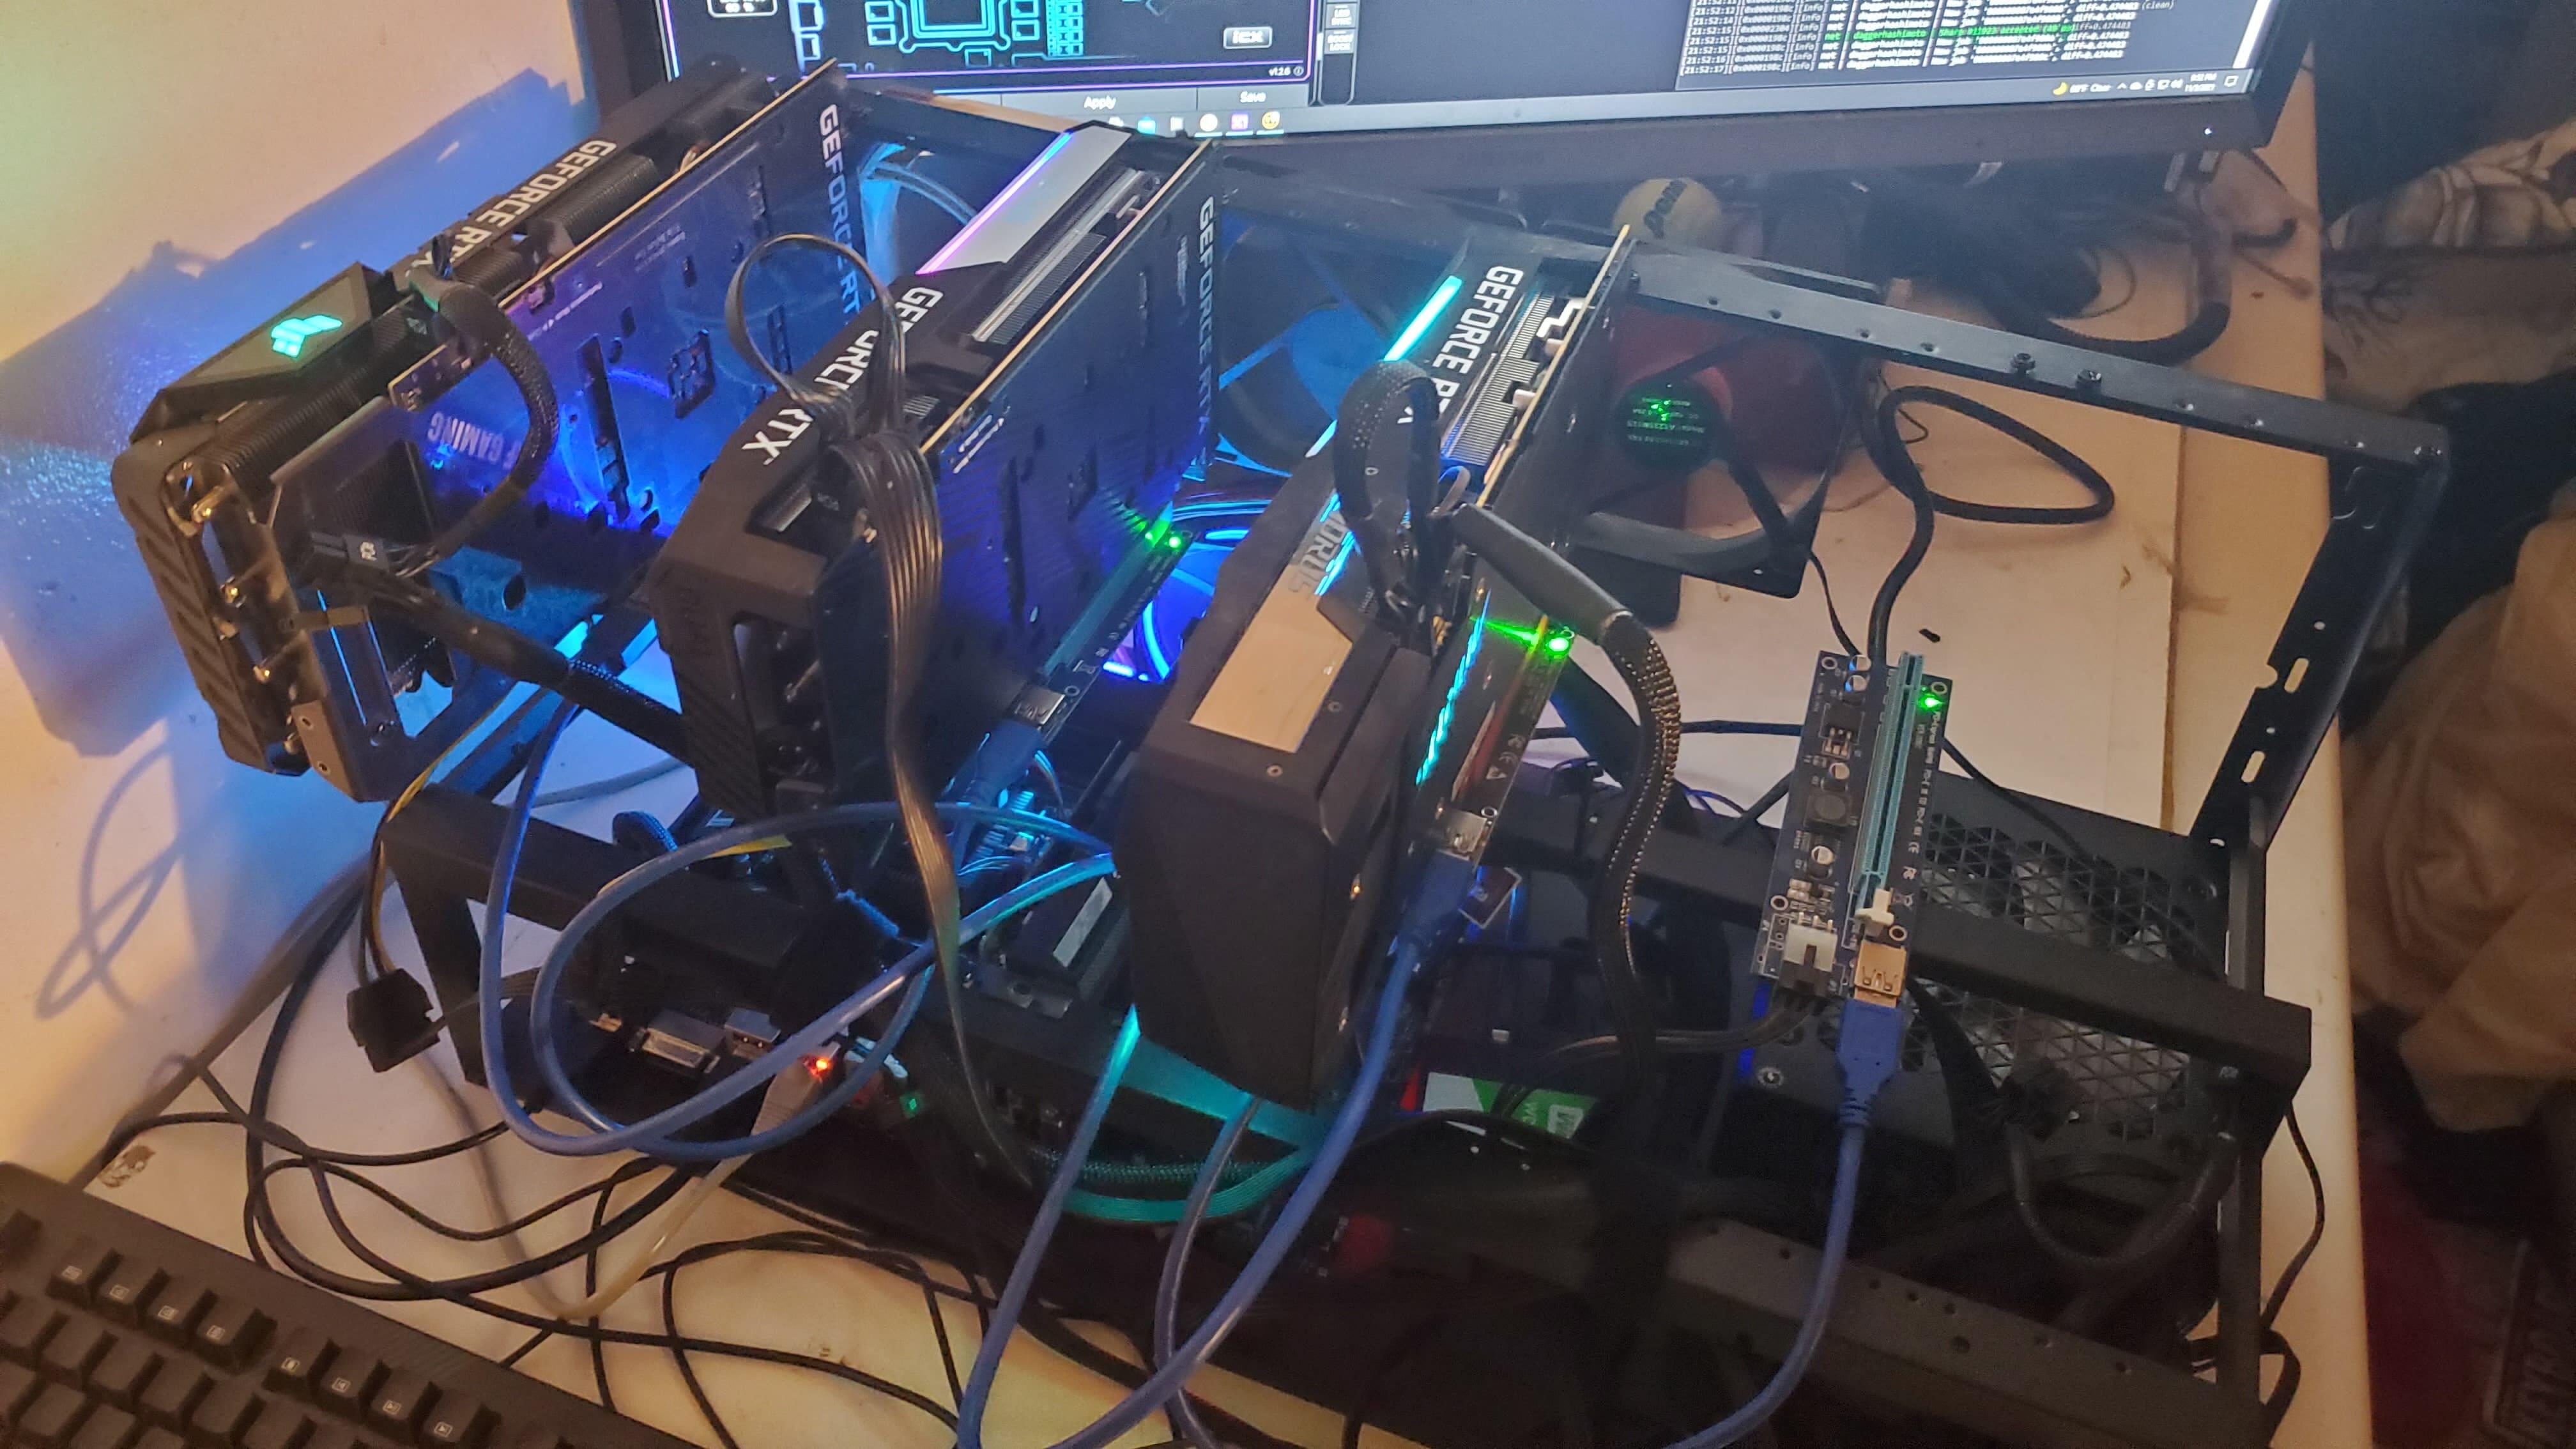 mining rig for ethereum